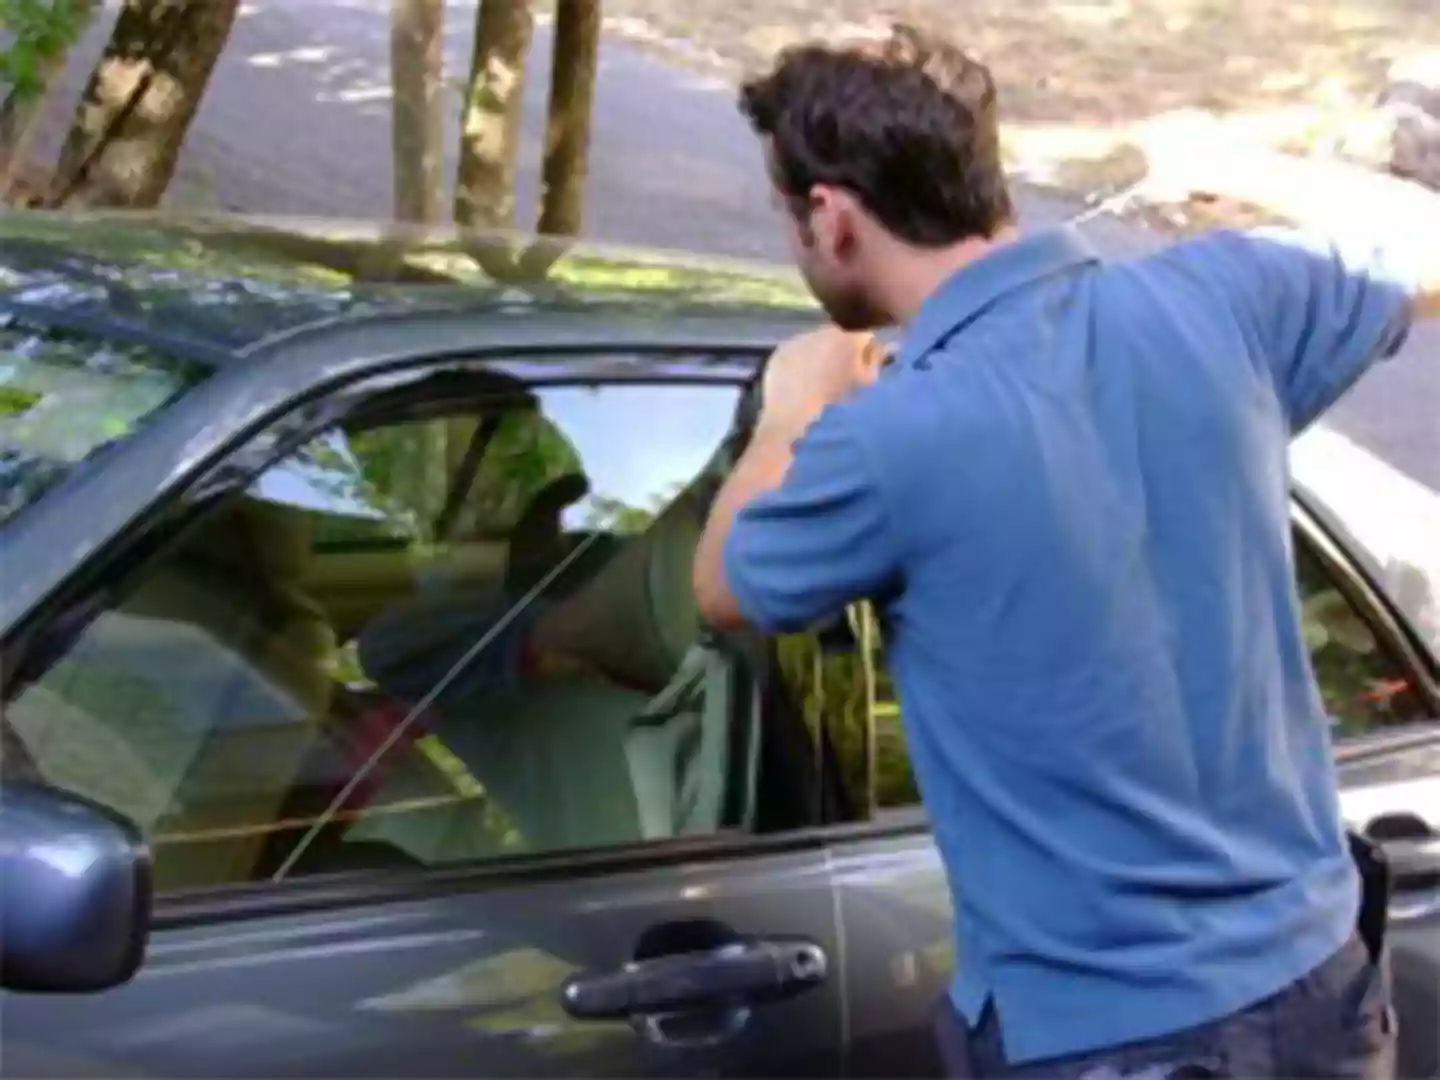 Locked out of your car? We can help.